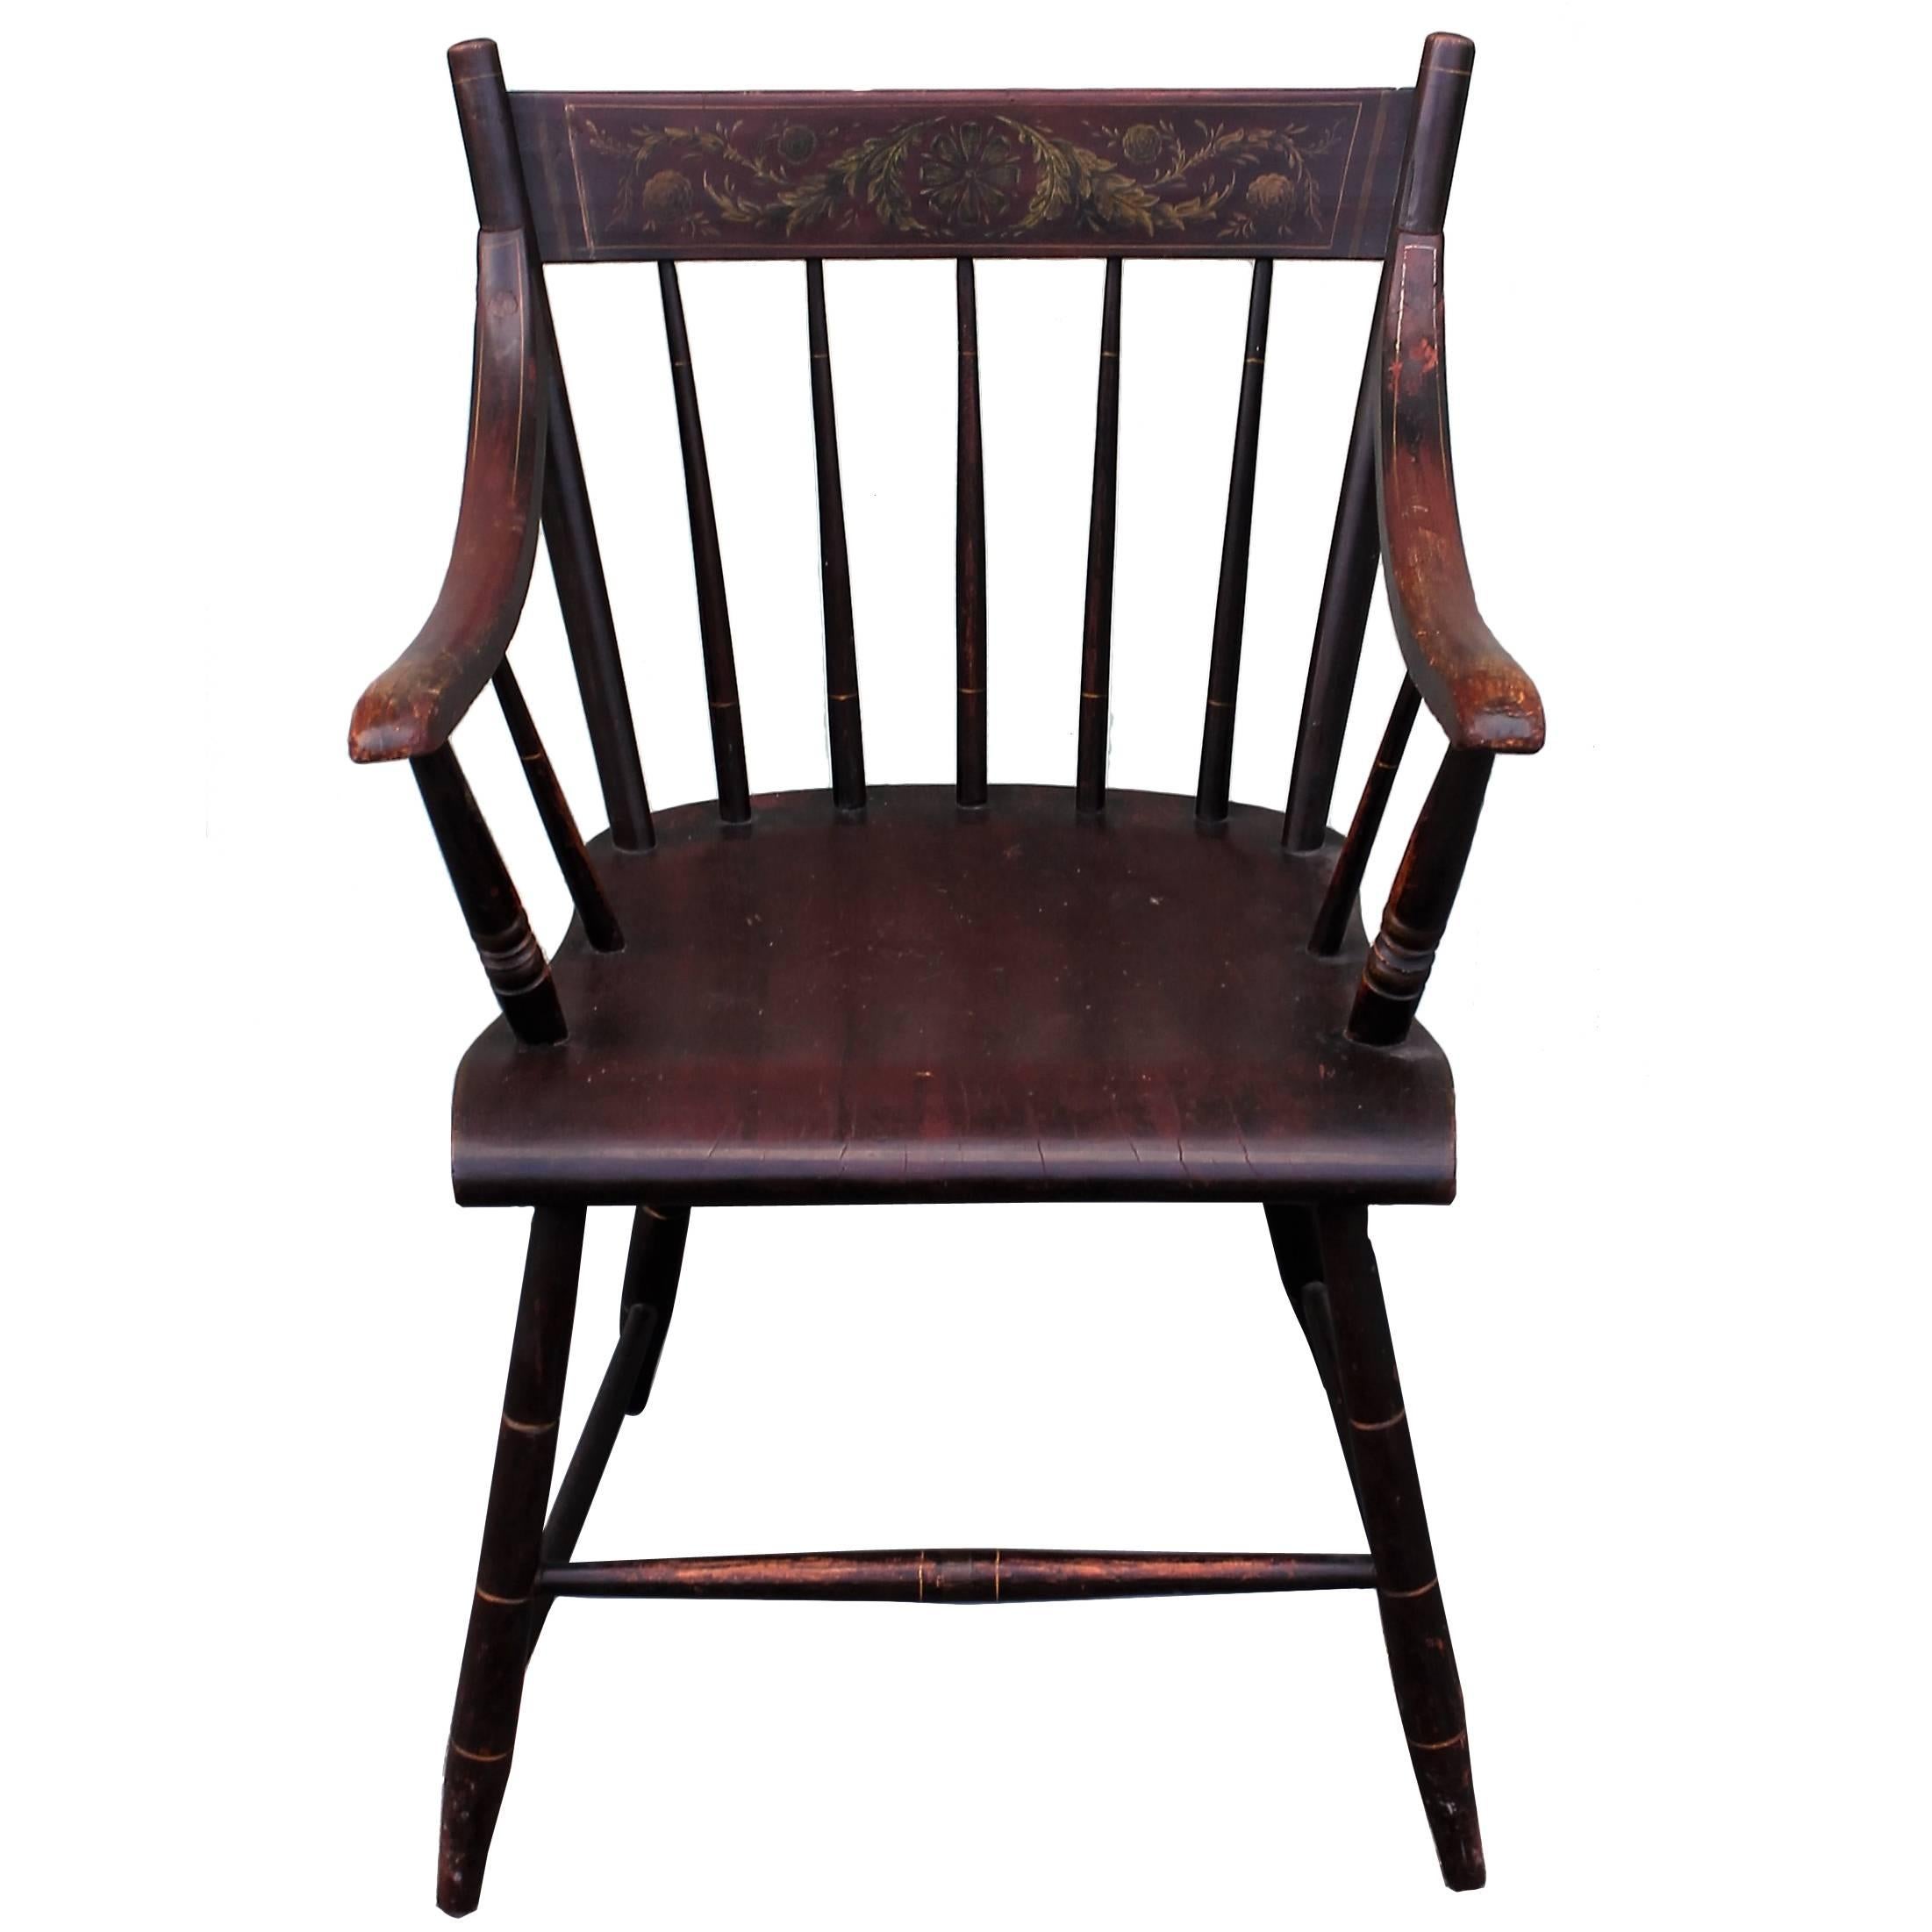 Early Original Paint Decorated 19th Century Hitchcock Armchair